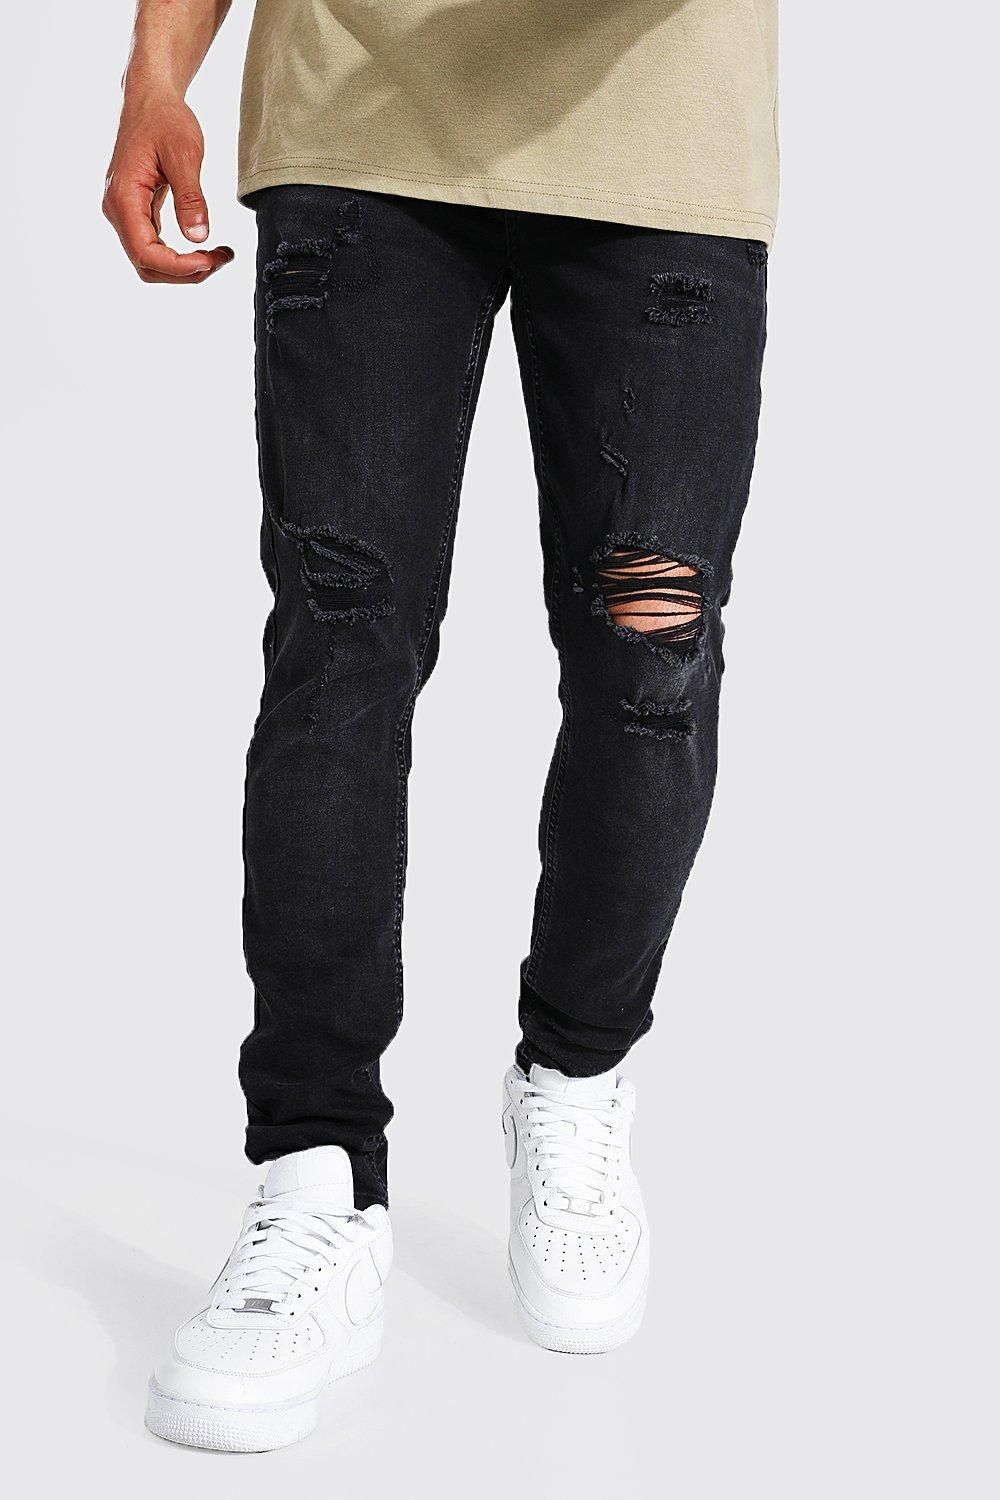 Make a style statement this summer with
mens ripped jeans